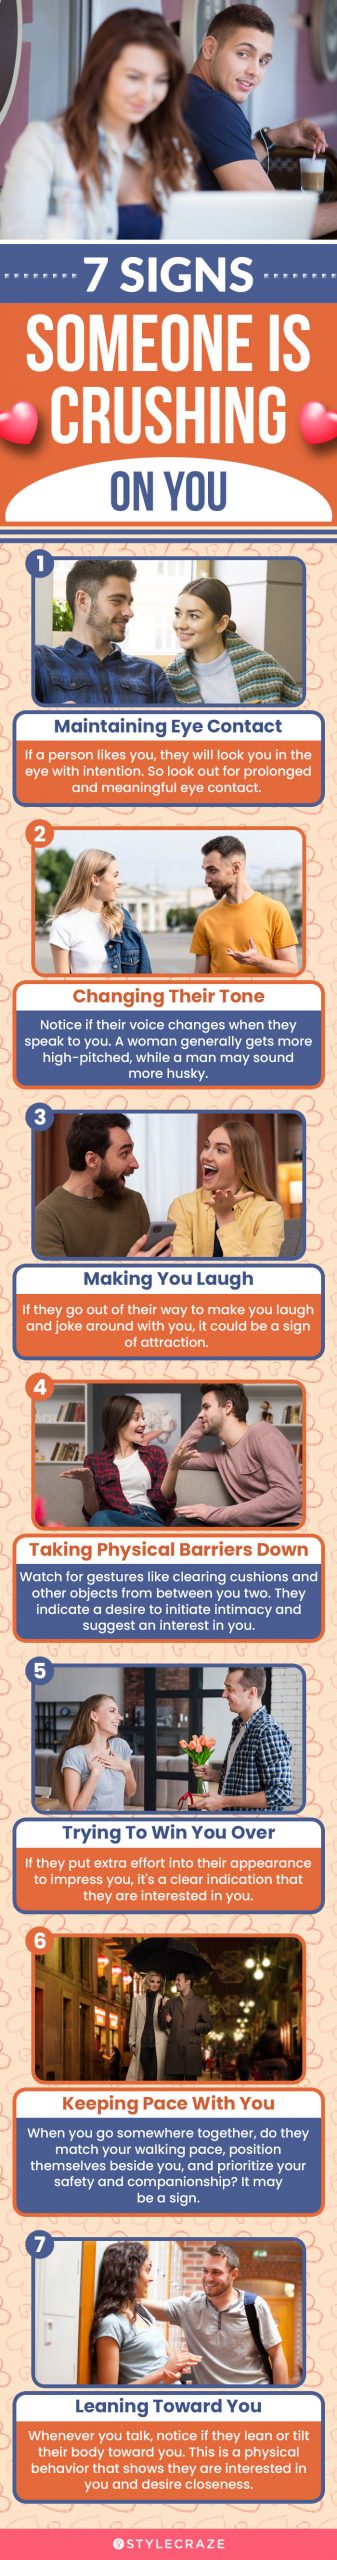 7 signs someone is crushing on you (infographic)